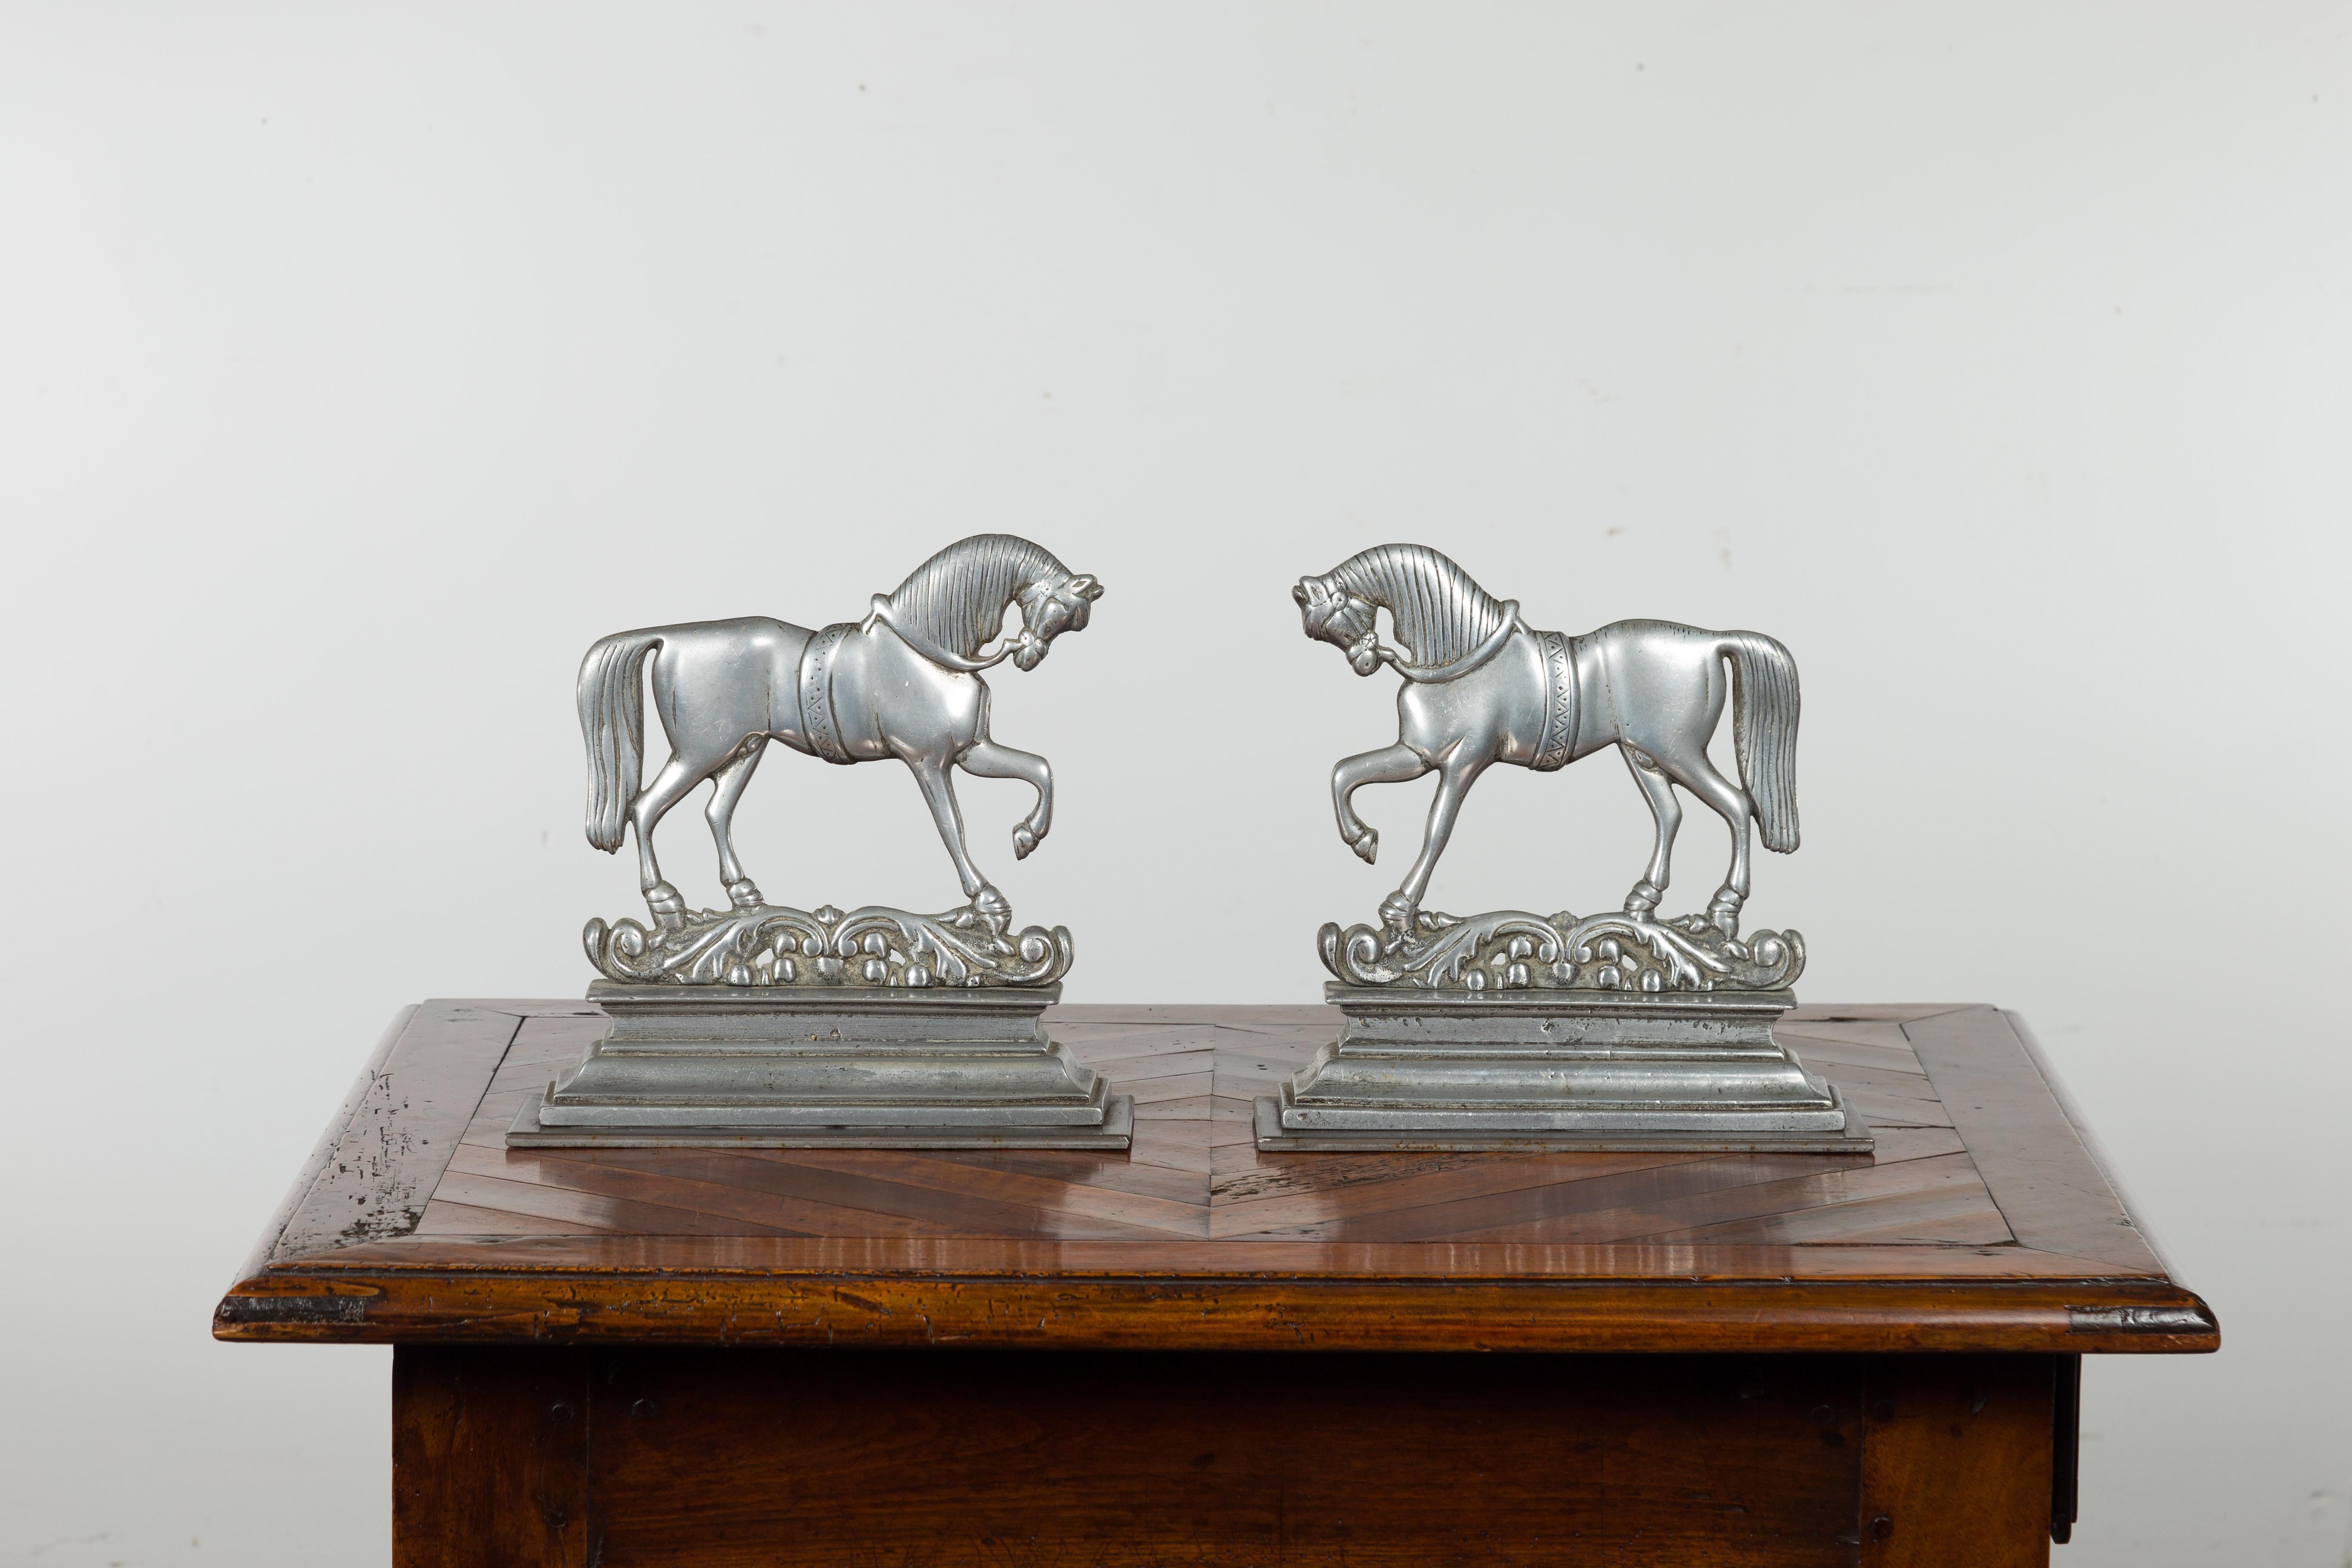 A pair of English silver toned metal prancing horses from the early 20th century, perfect to be used as bookends. Created in England during the turn of the century, each of this pair of metal bookends features elegant horses standing gracefully on a